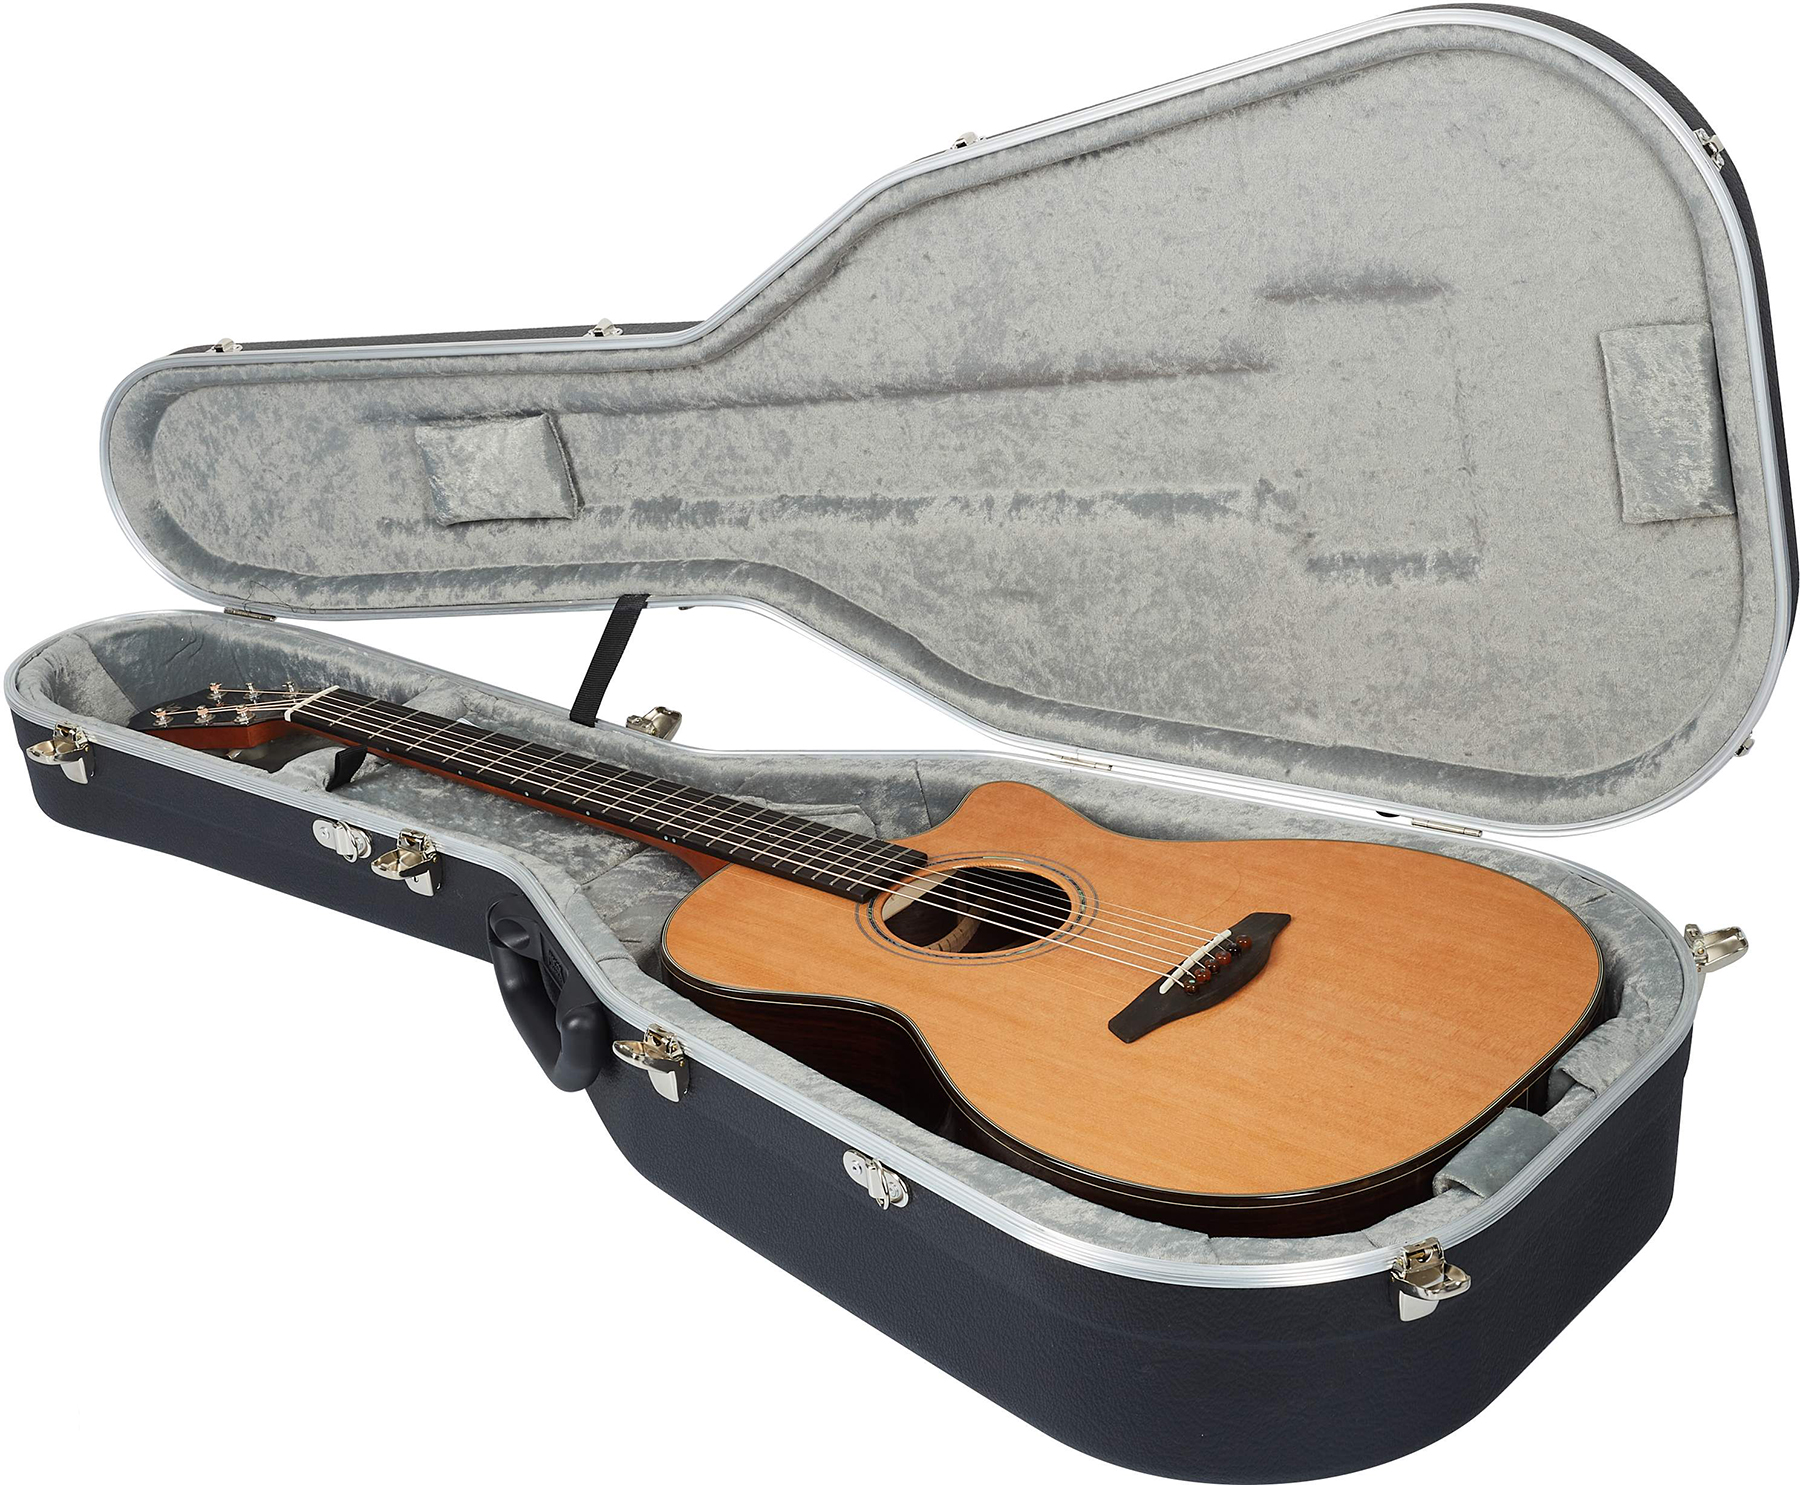 Furch Omc-cr Lrb1 Yellow Orchestra Model Cw Cedre Palissandre Eb - Natural Full-pore - Guitare Electro Acoustique - Variation 8